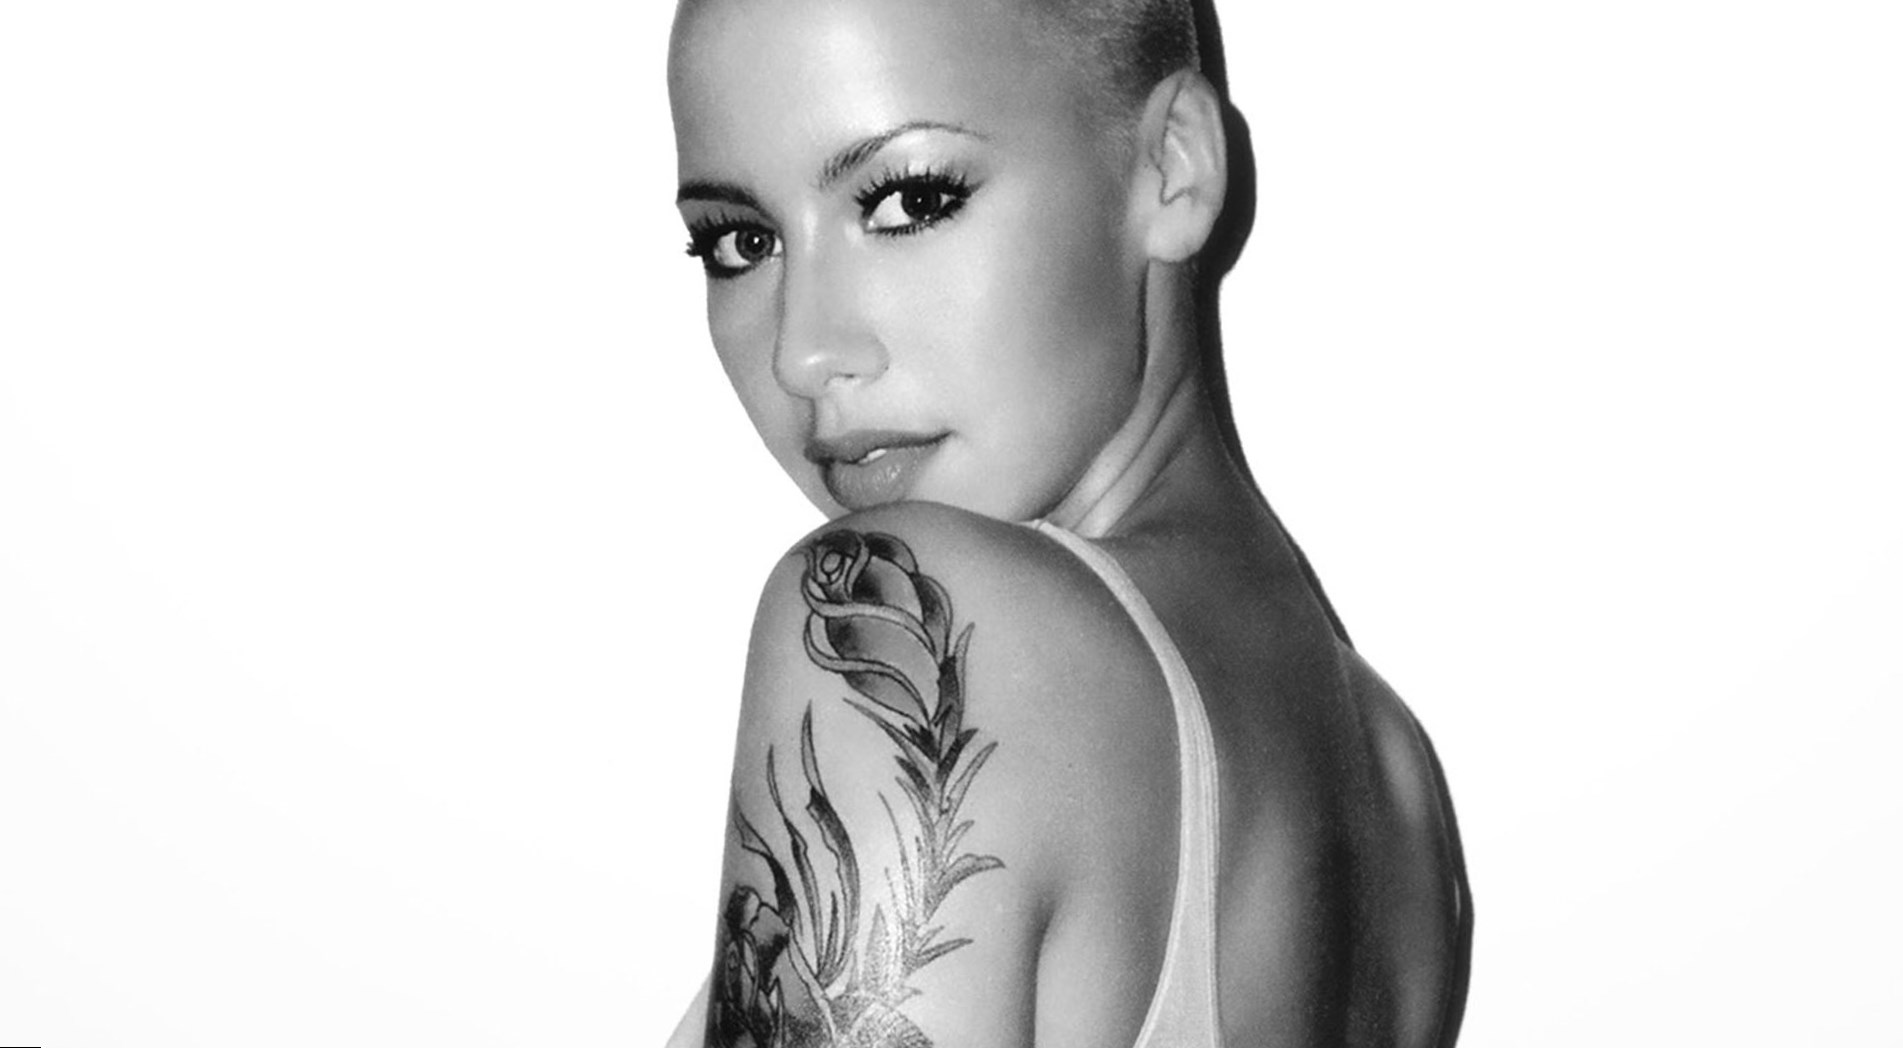 Amber Rose Height, Weight, Age and Body Measurements